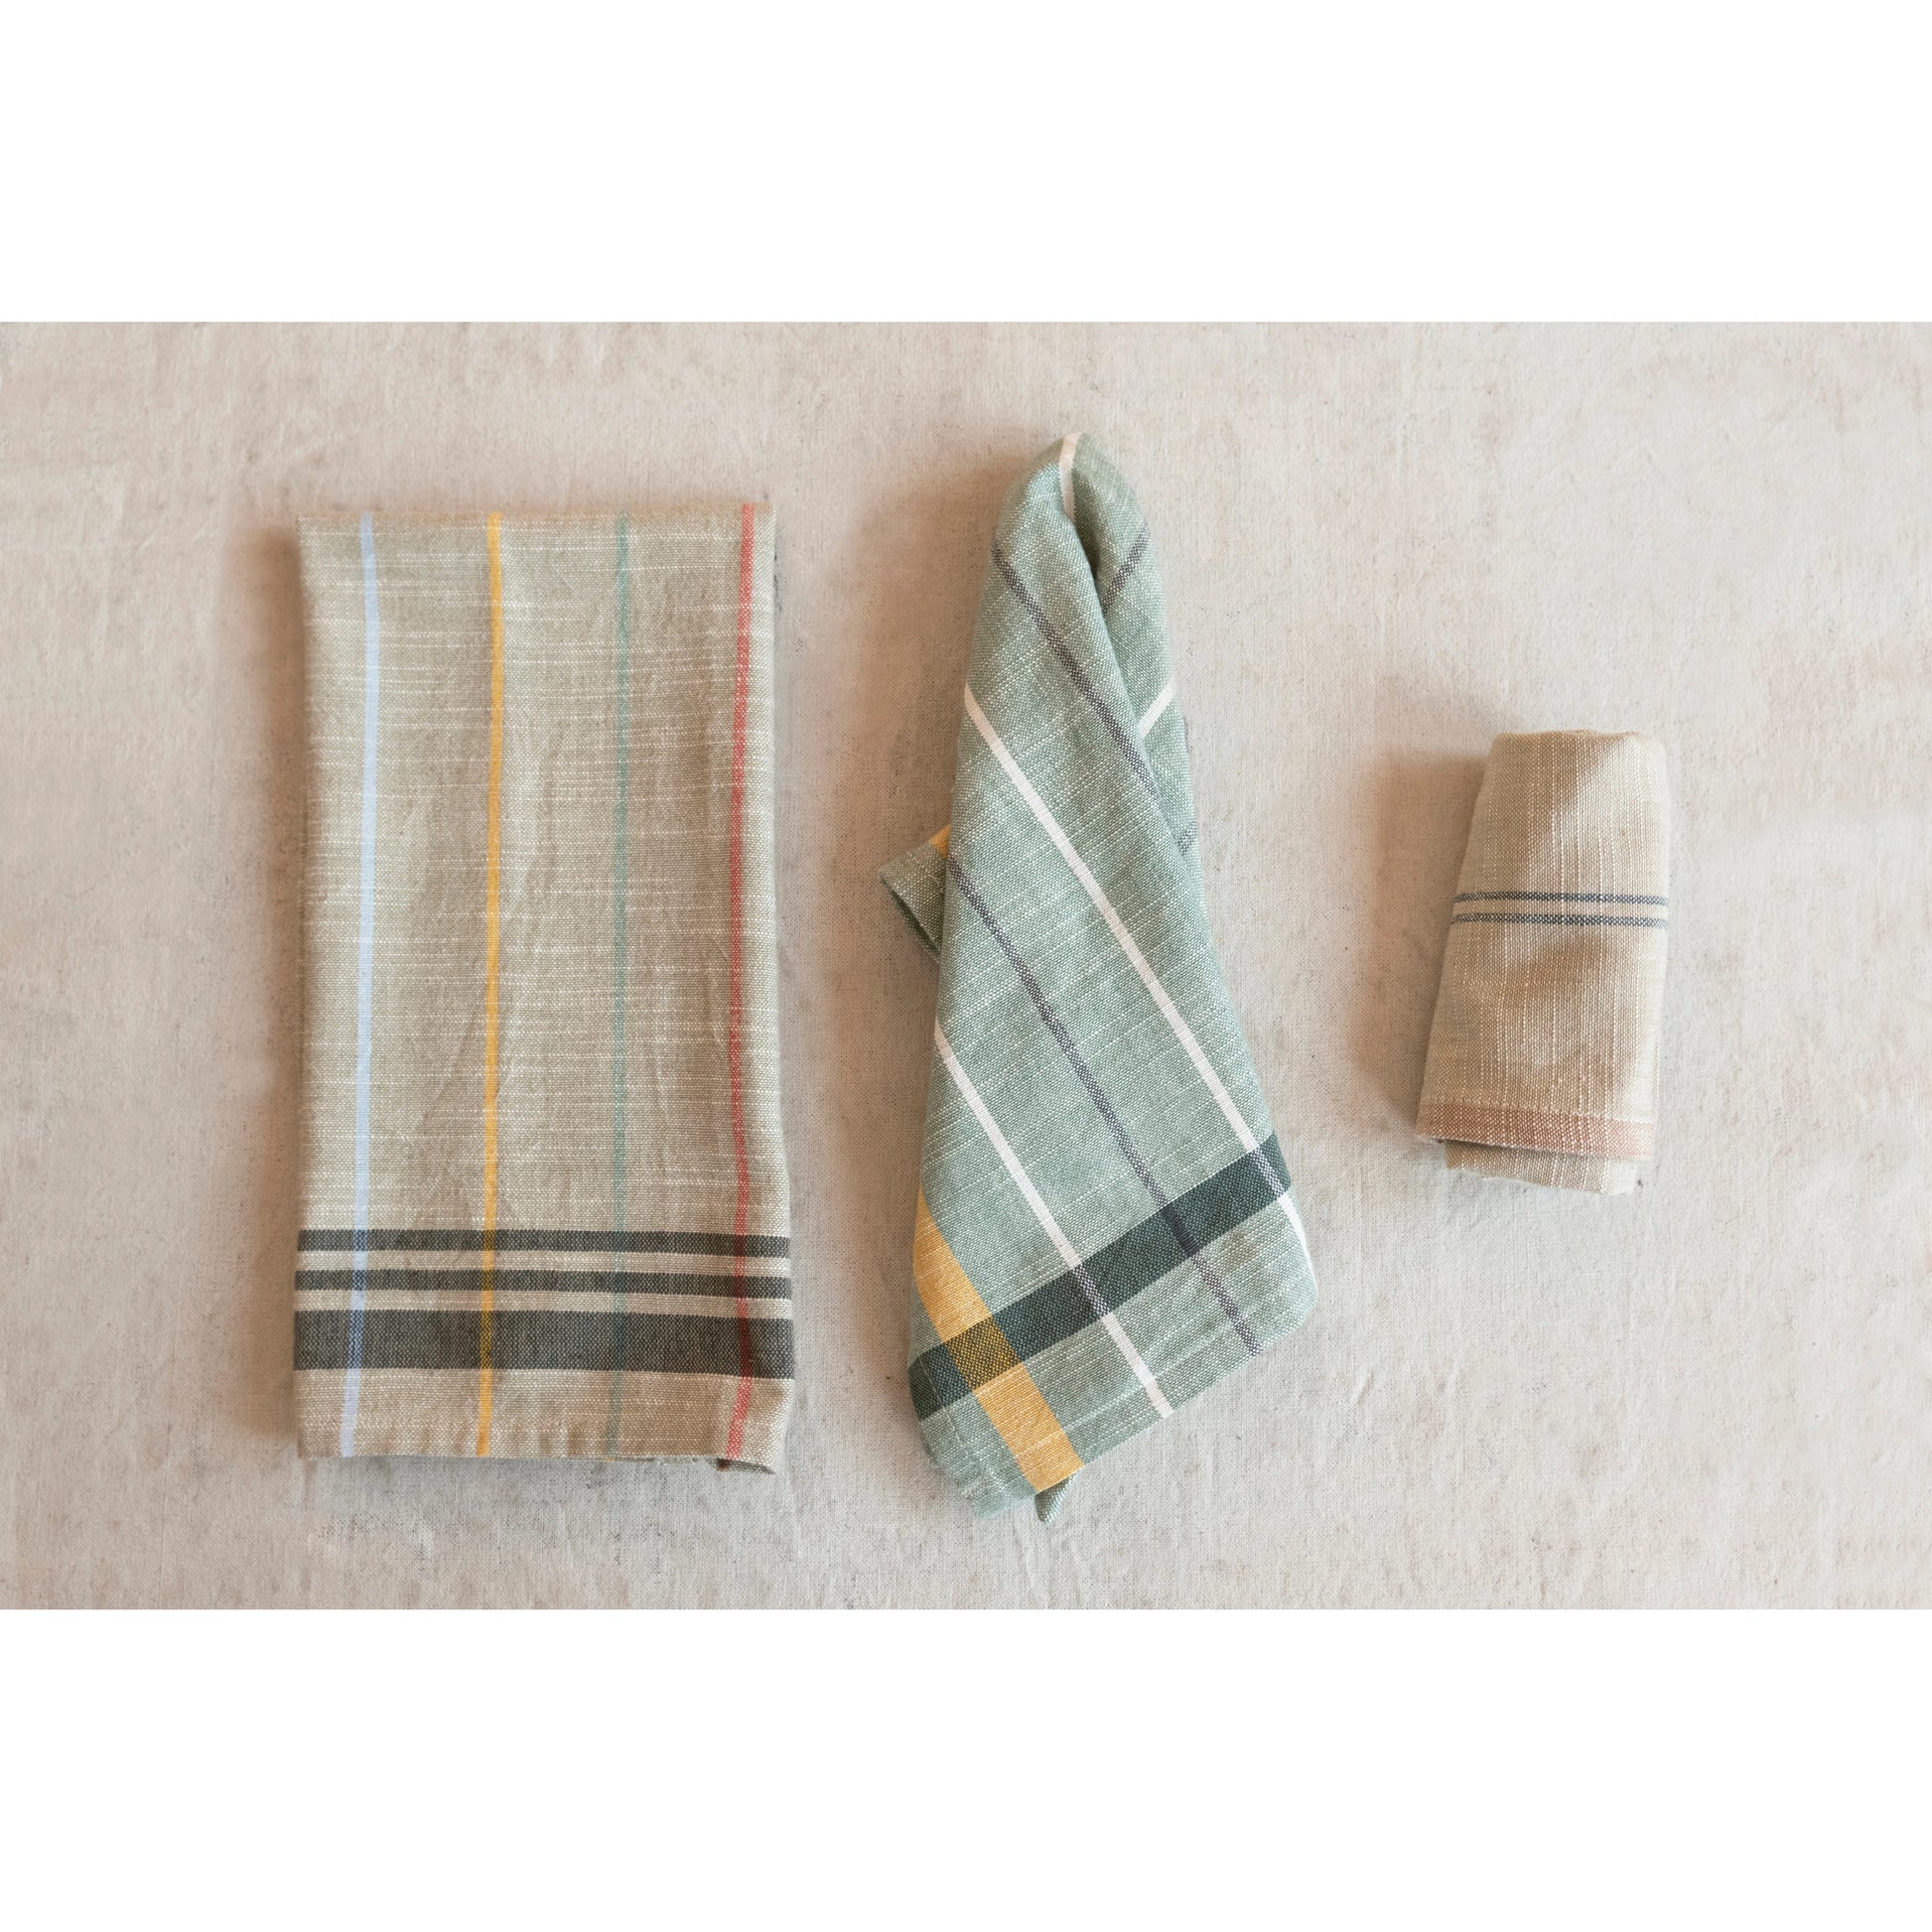 Why are Kitchen Towels so Important? - All Cotton and Linen